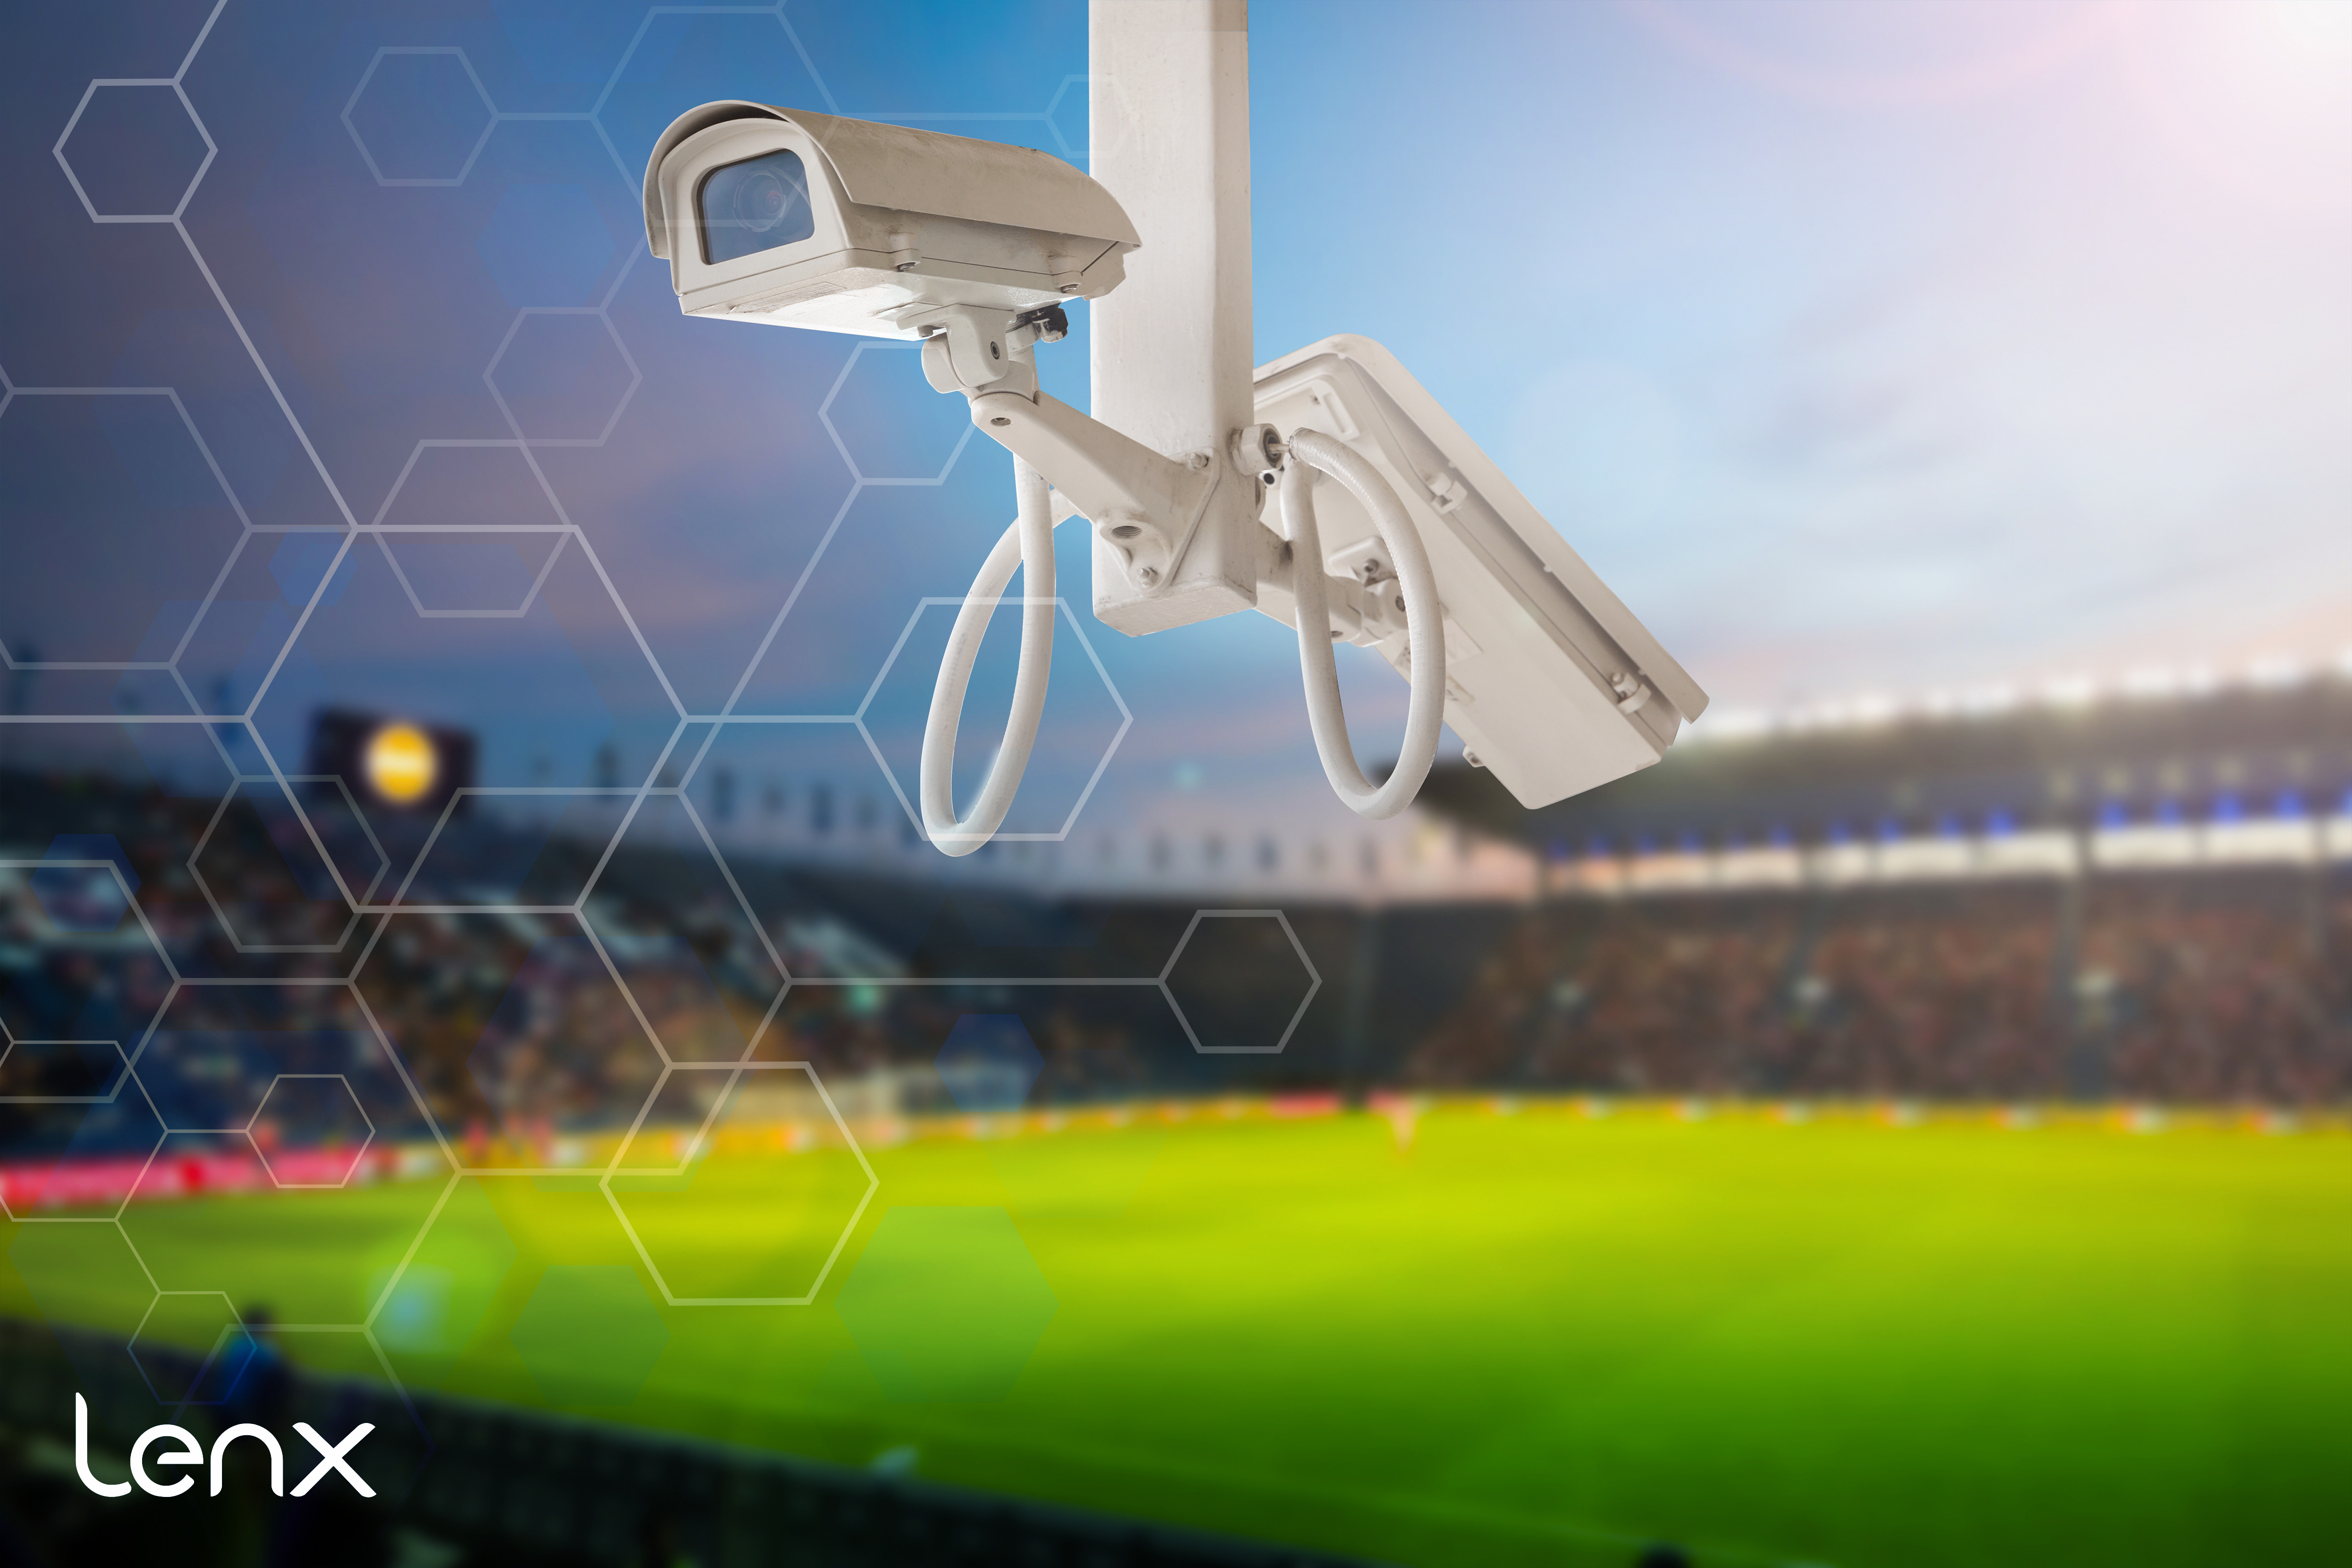 Keeping Stadiums and Sports Venues Safe with AI Security and Active Shooter Detection